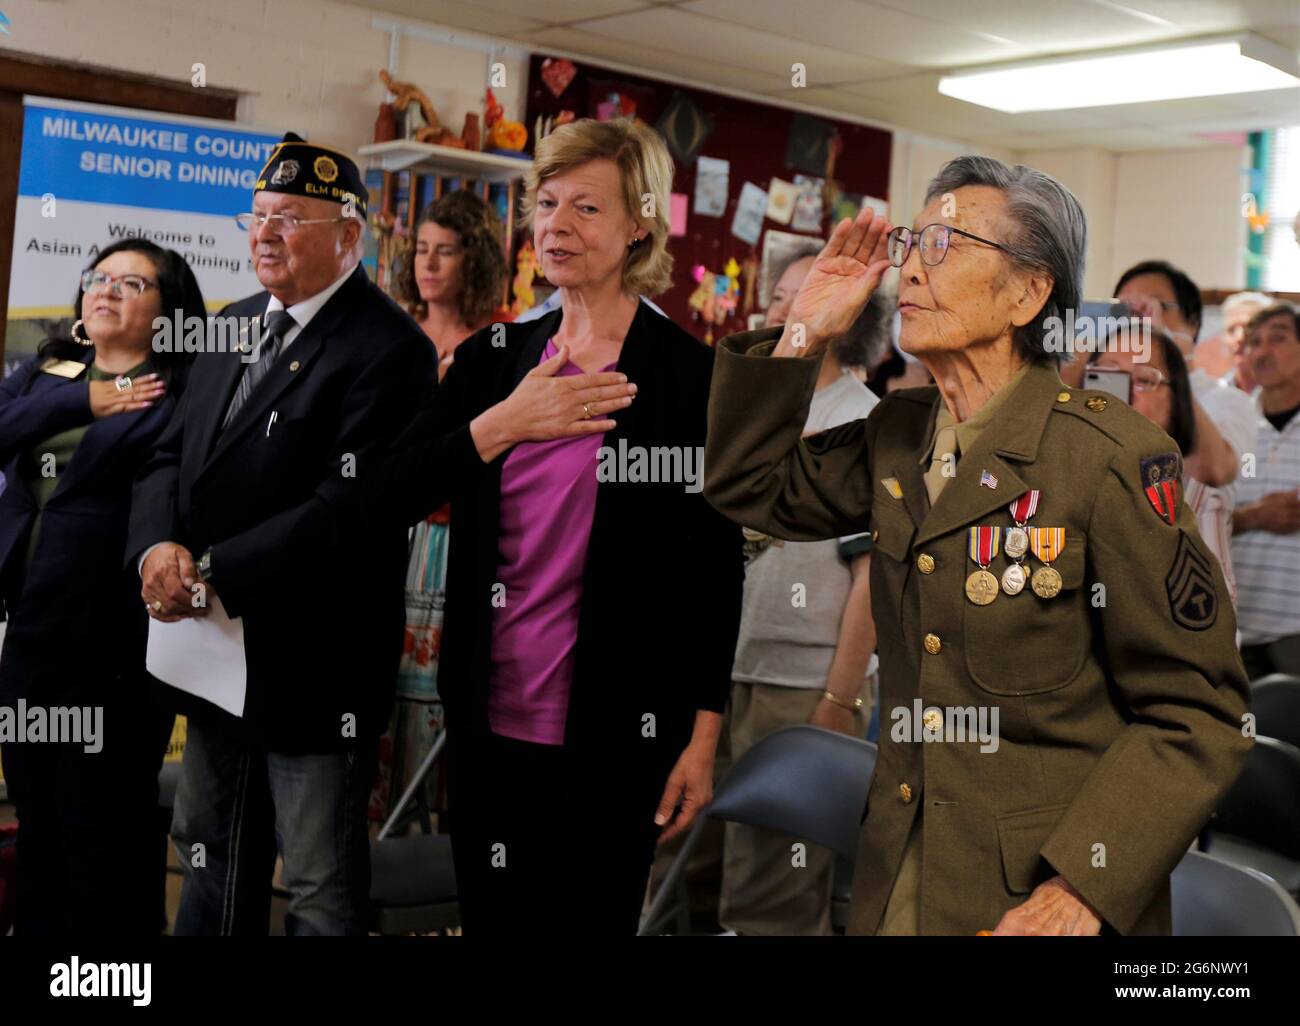 July 7, 2021, Milwaukee, Wisconsin, U.S: DR. DAVID TOY (right to left), U.S. SENATOR TAMMY BALDWIN, ALEX KOLANDER, Commander of American Legion Post 449, and regional representative to Baldwin, VANESSA L. LLANAS stand as they recited the Pledge of Allegiance during opening ceremony. The Organization of Chinese Americans-Wisconsin Chapter and the Chinese Golden Age Club of Milwaukee honored.DR. DAVID TOY, 97, Wednesday July 7, 2021, as he receives the Chinese-American World War II Veteran Service Medal at the Chinese Community Baptist Church in Milwaukee. DR. DAVID TOY was not a U.S. citizen w Stock Photo